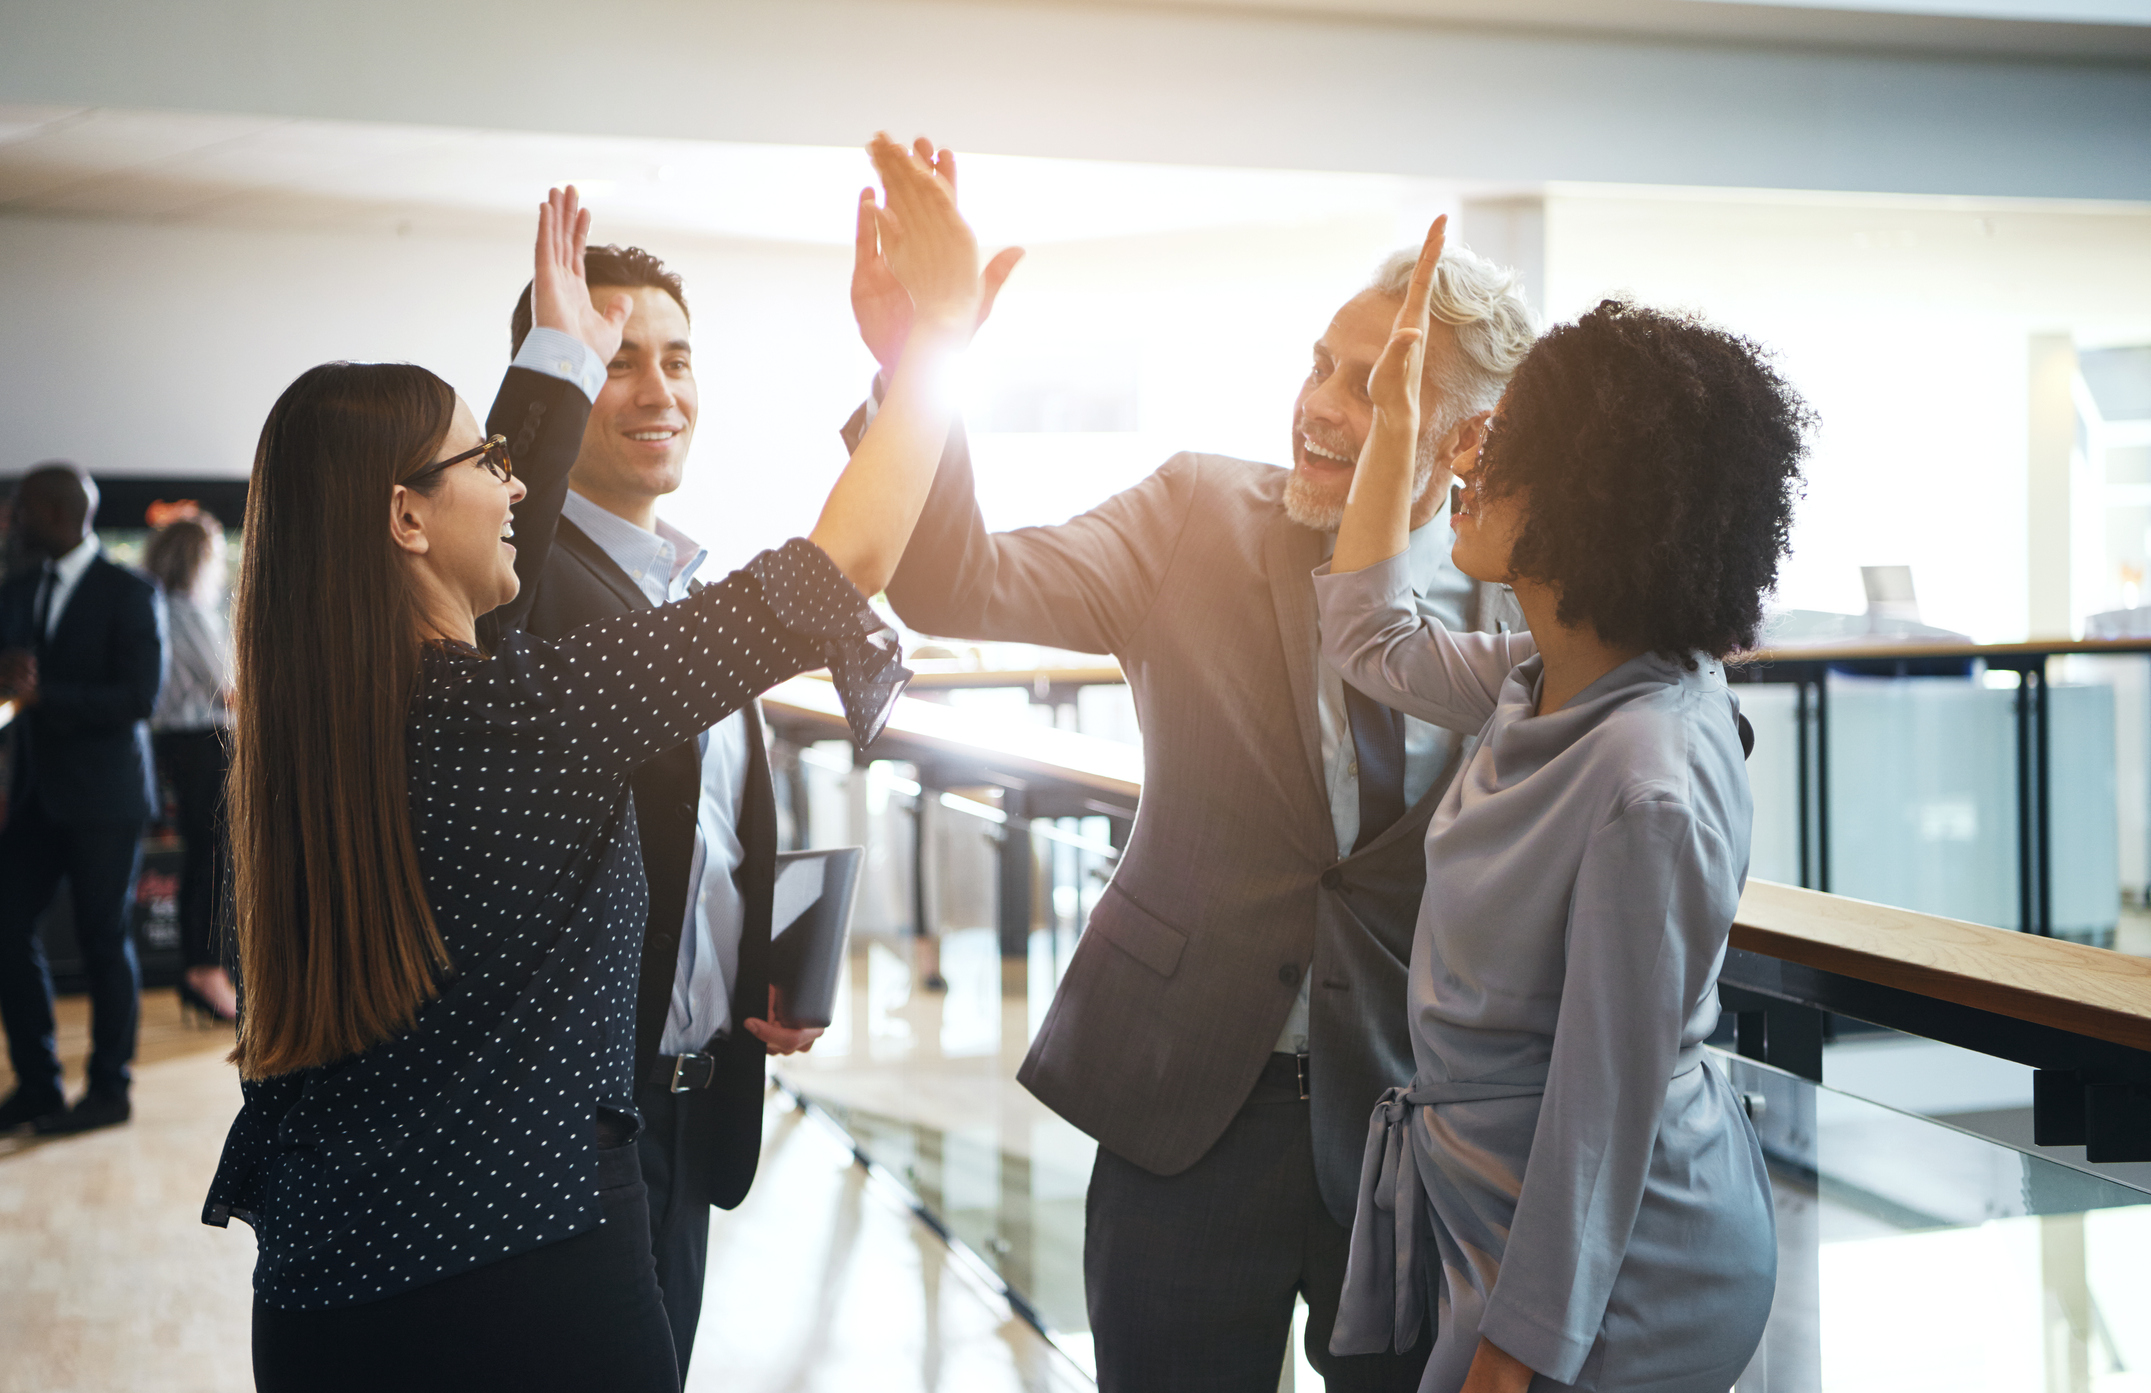 Stock photo of a group of four coworkers high fiving